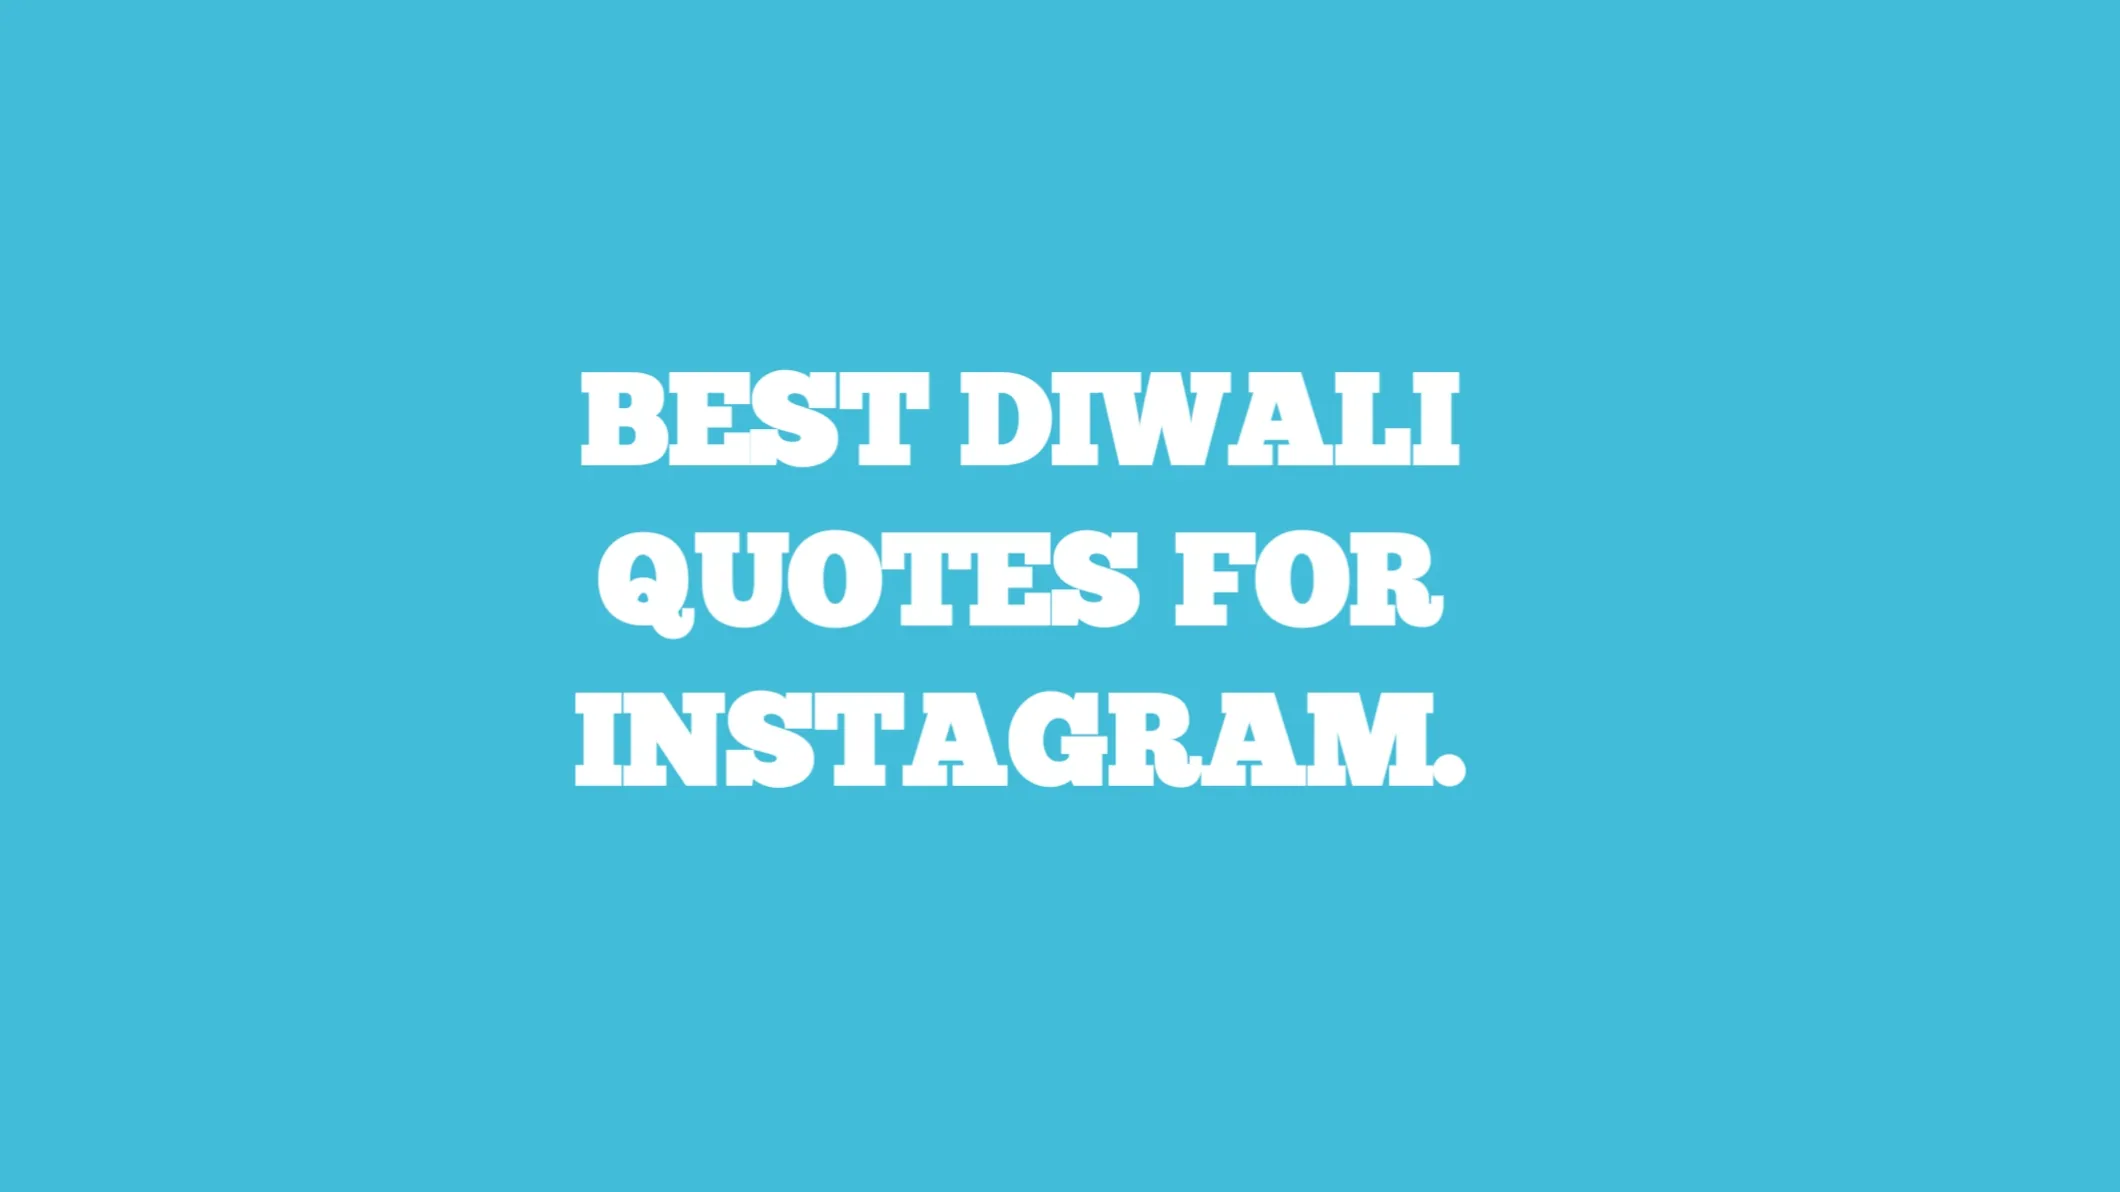 diwali quotes for instagram